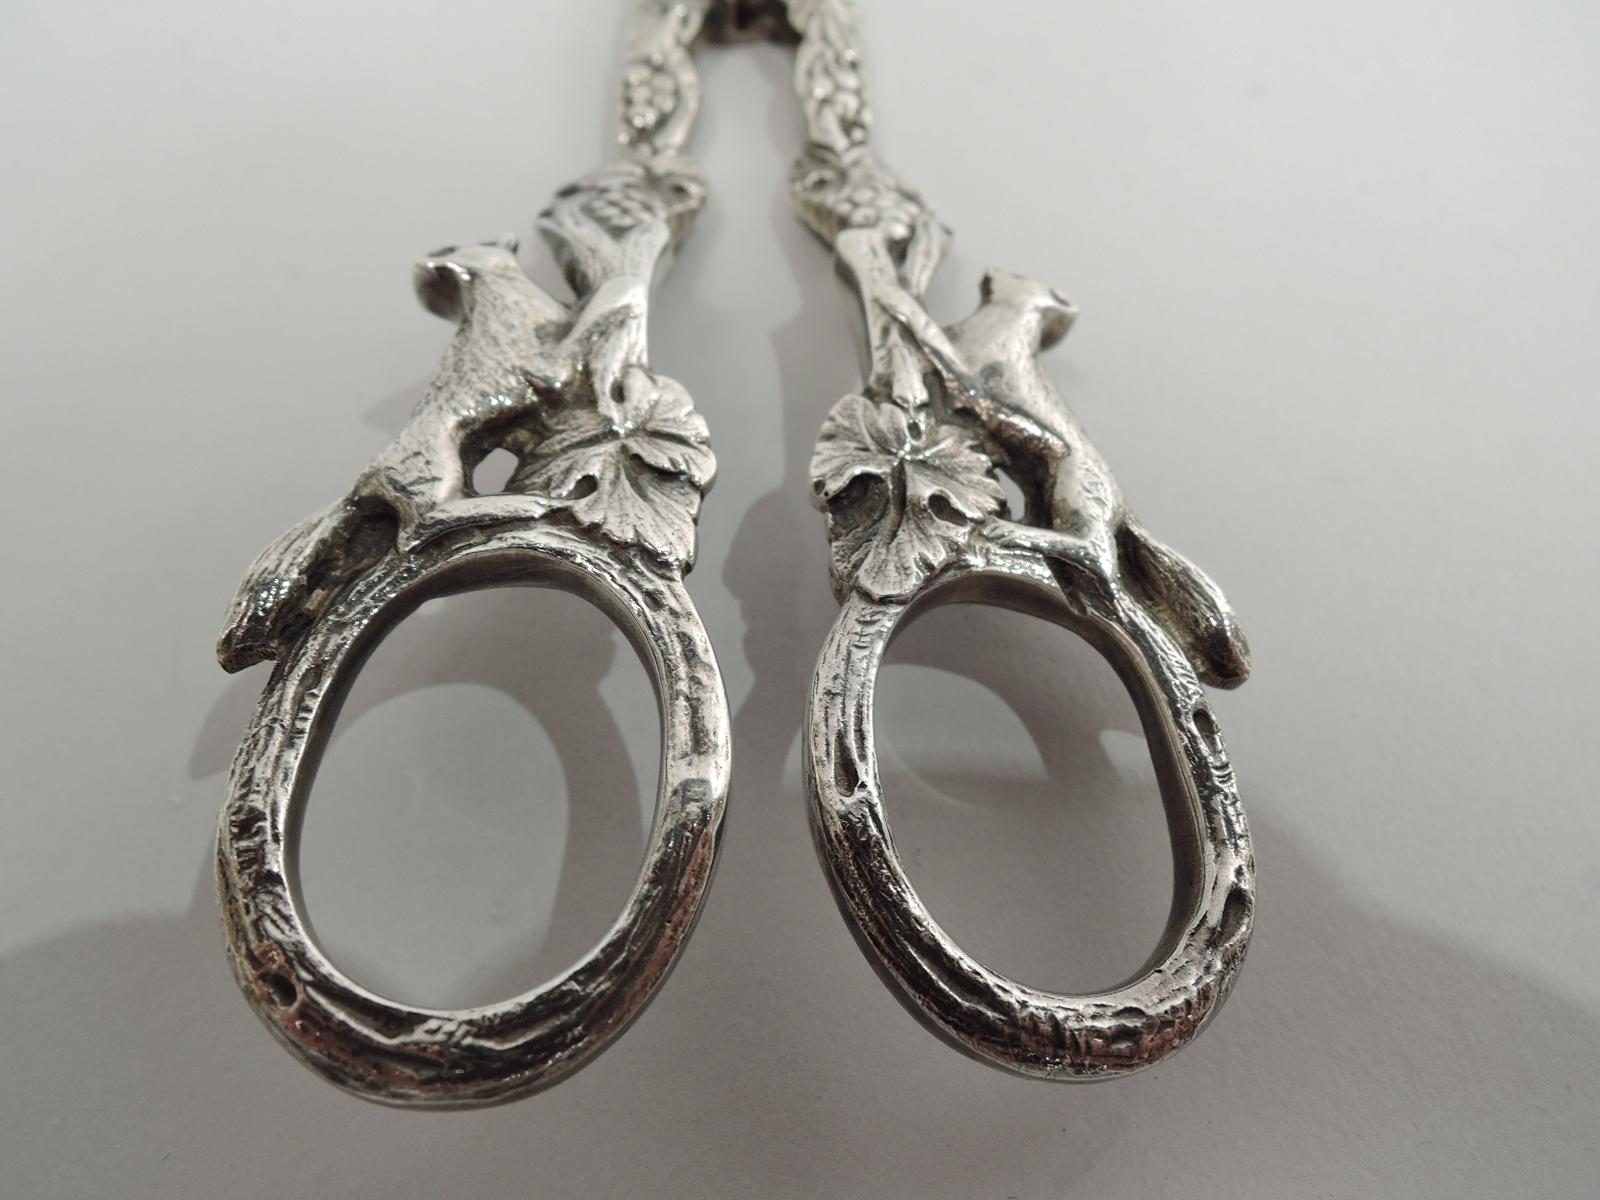 Victorian English Sterling Silver Grape Shears with Aesop Theme